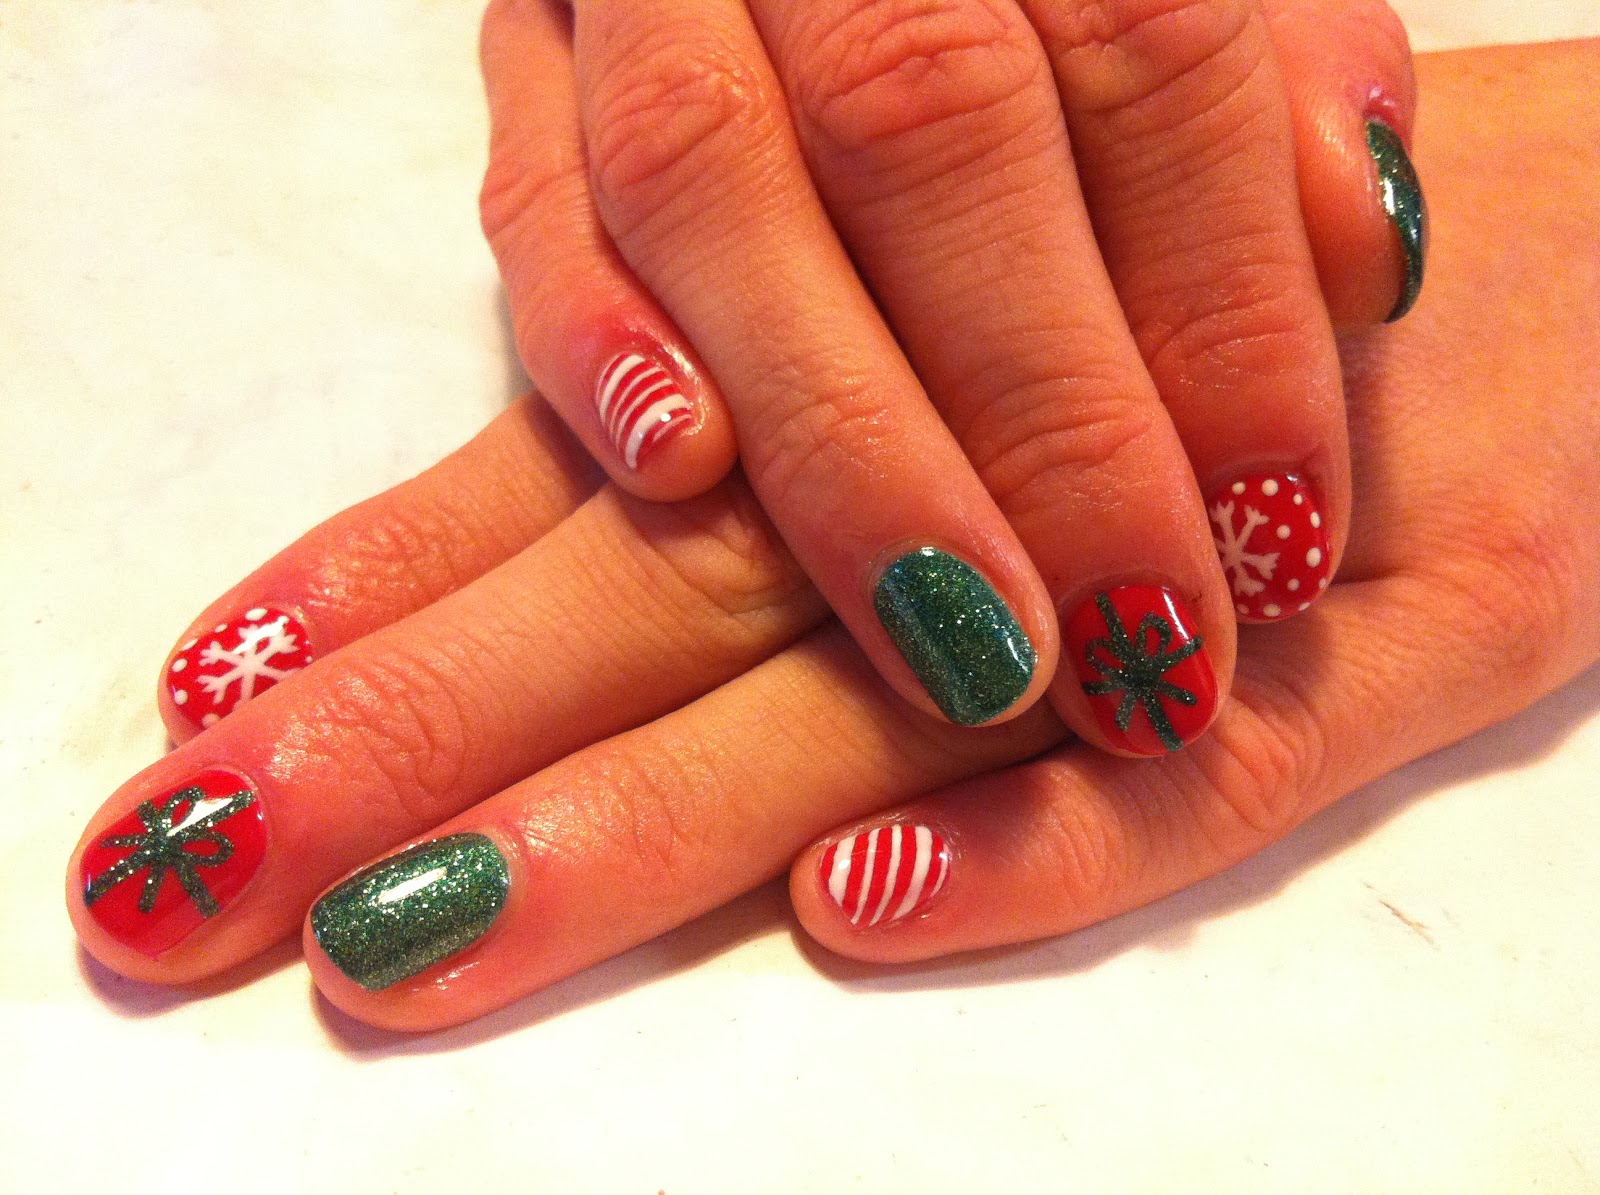 Green Shellac Nail Designs for Christmas - wide 2